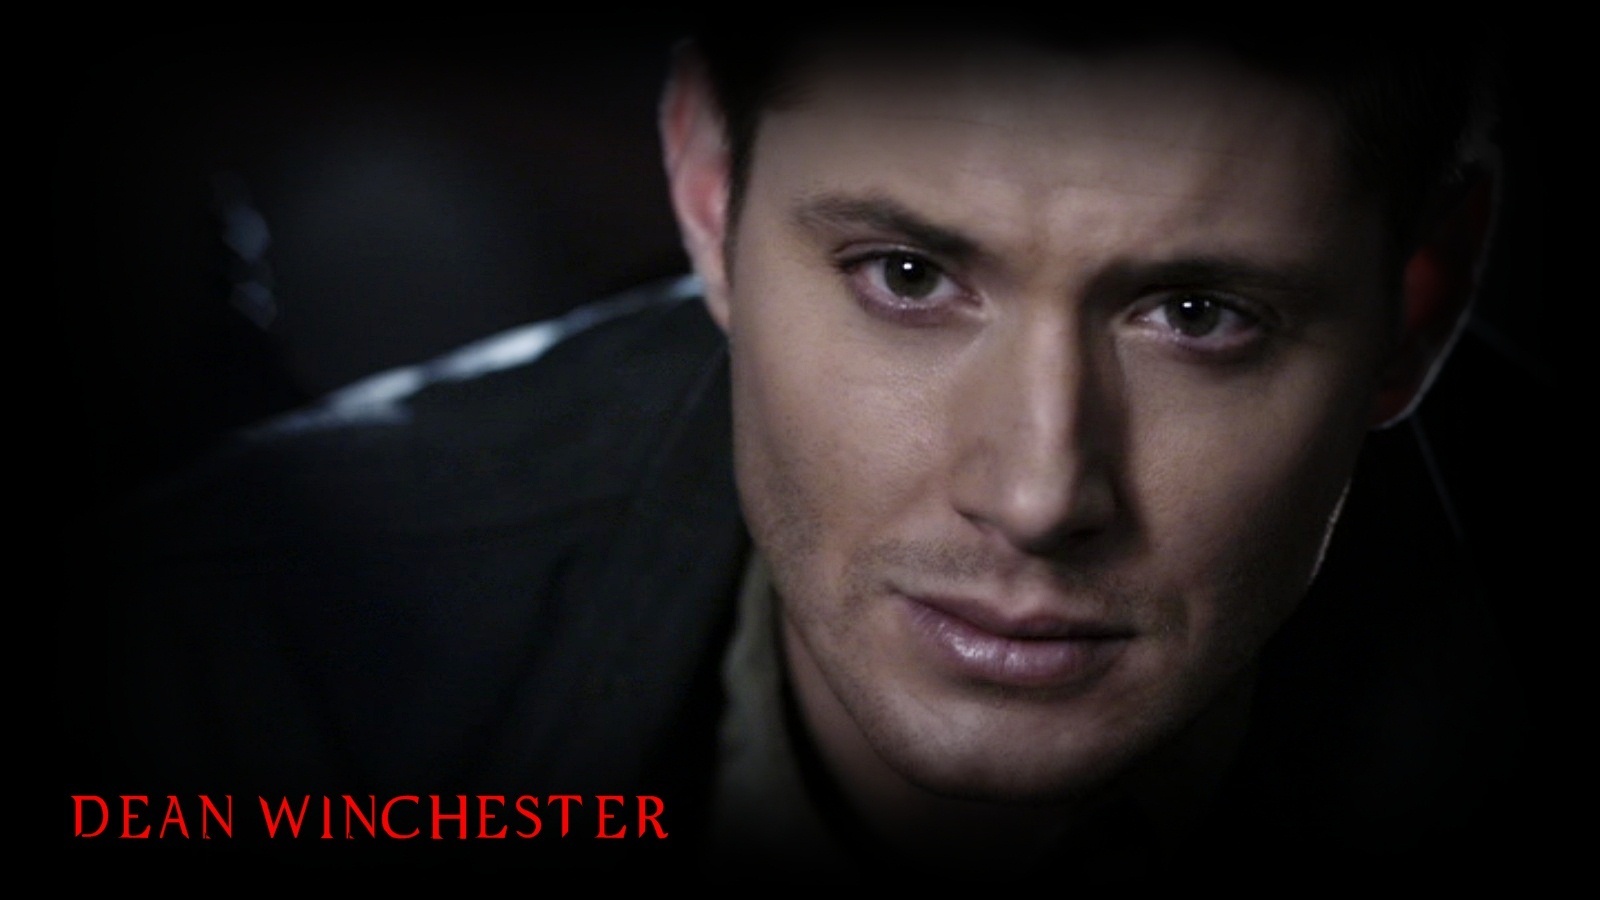 Dean Winchester Image HD Wallpaper And Background